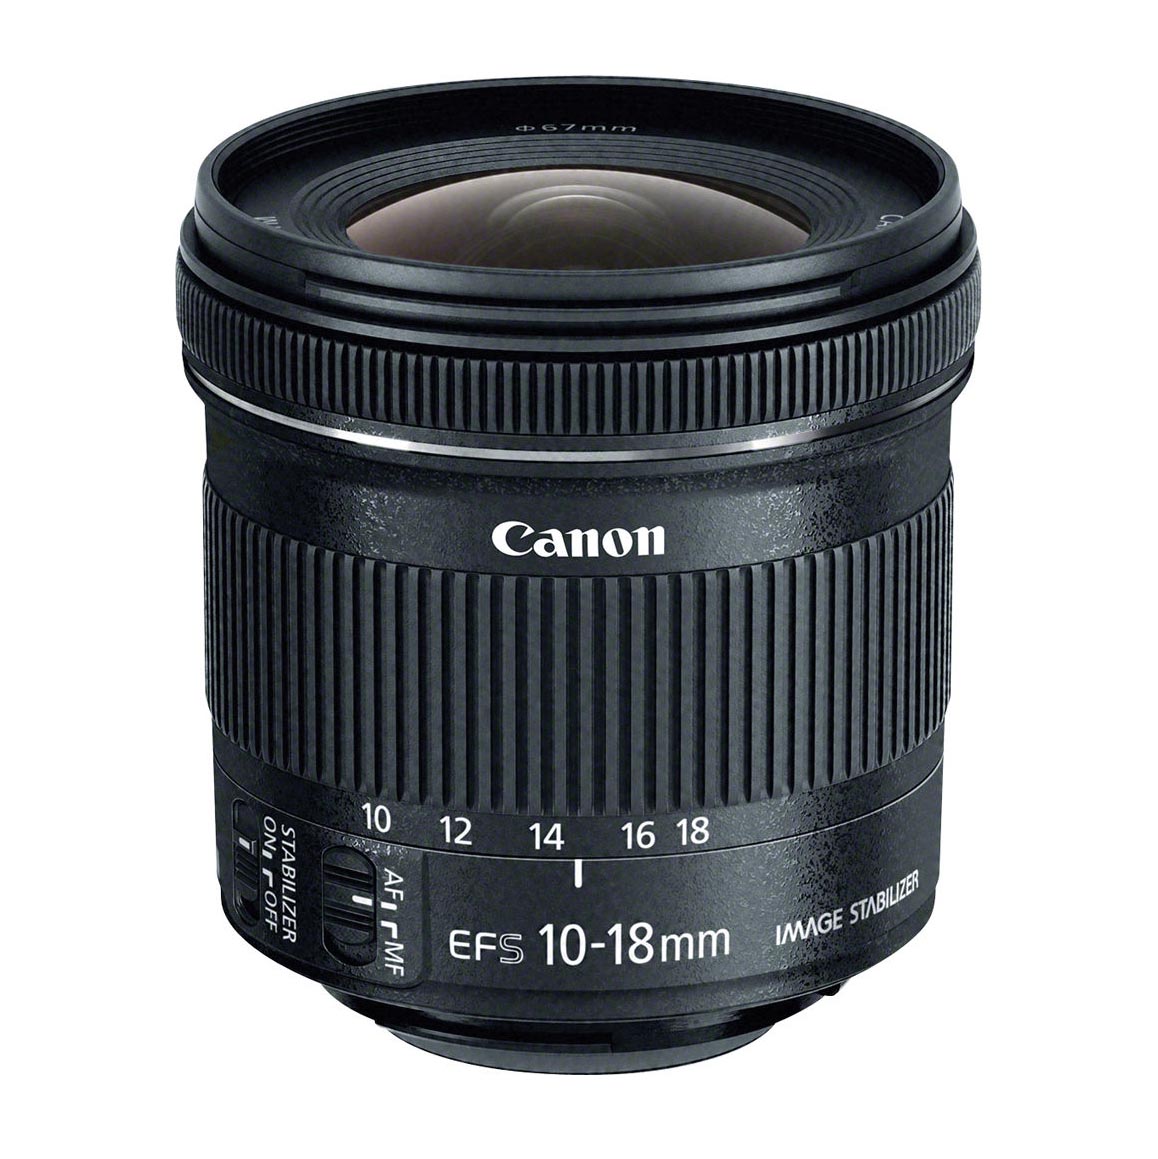 Объектив Canon EF-S 10-18mm f/4.5-5.6 IS STM, черный объектив canon ef 35mm f 1 4l usm